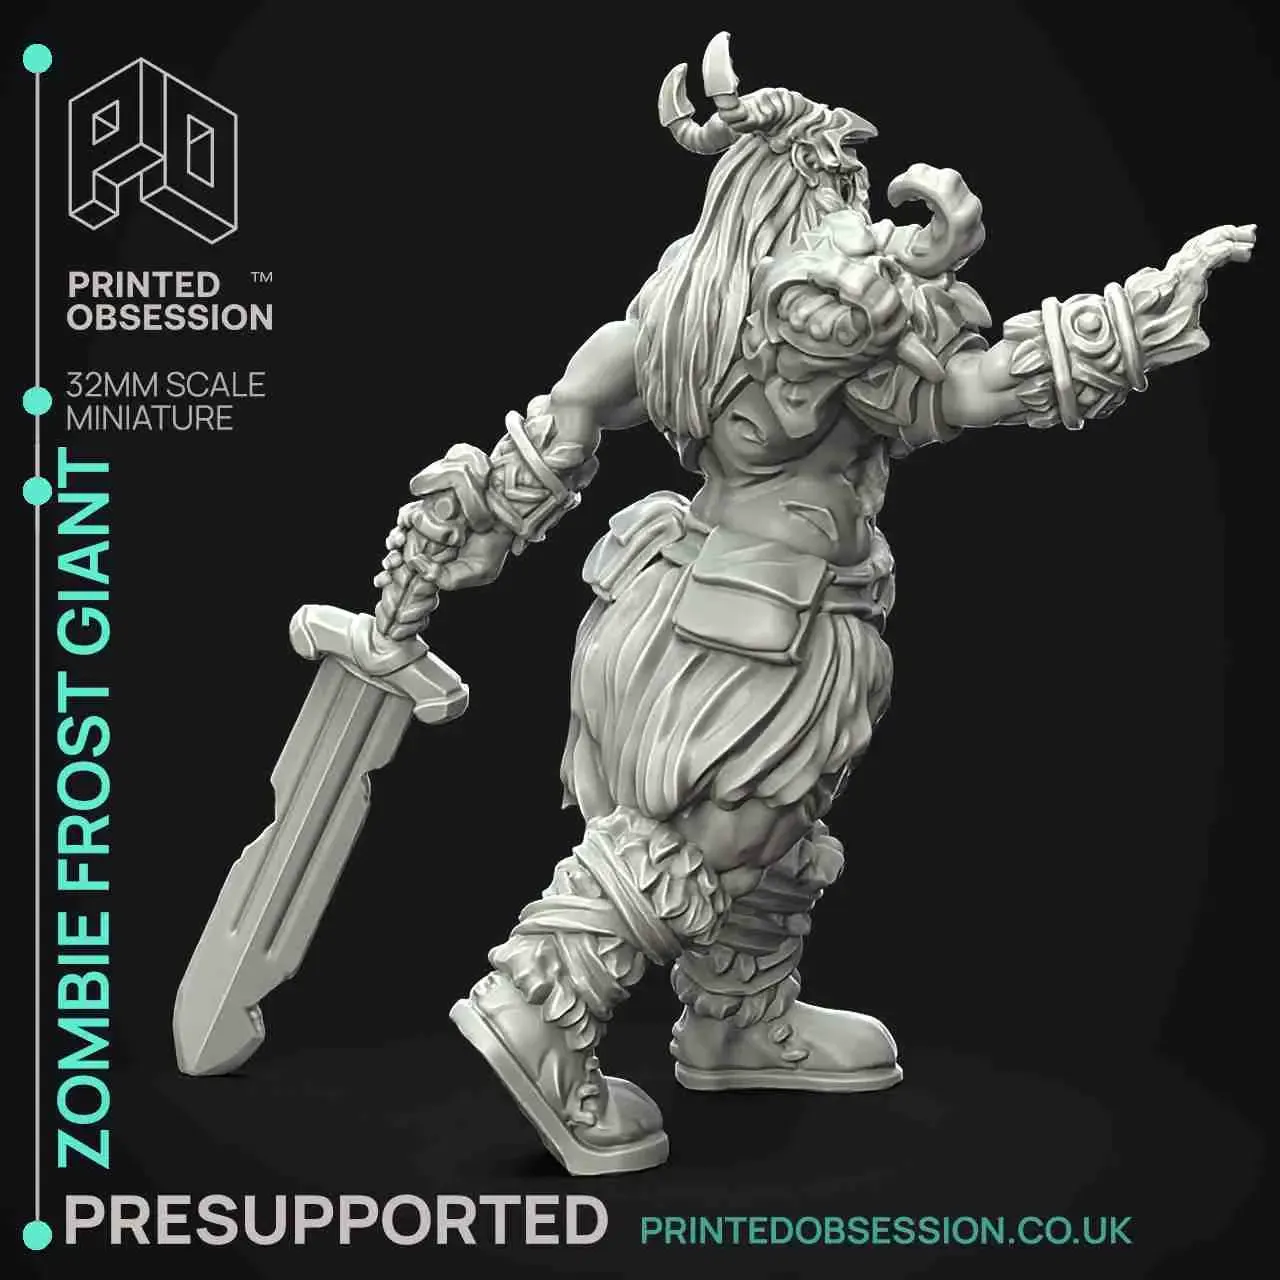 Zombie Frost Giant - Monster - PRESUPPORTED - 32mm Scale